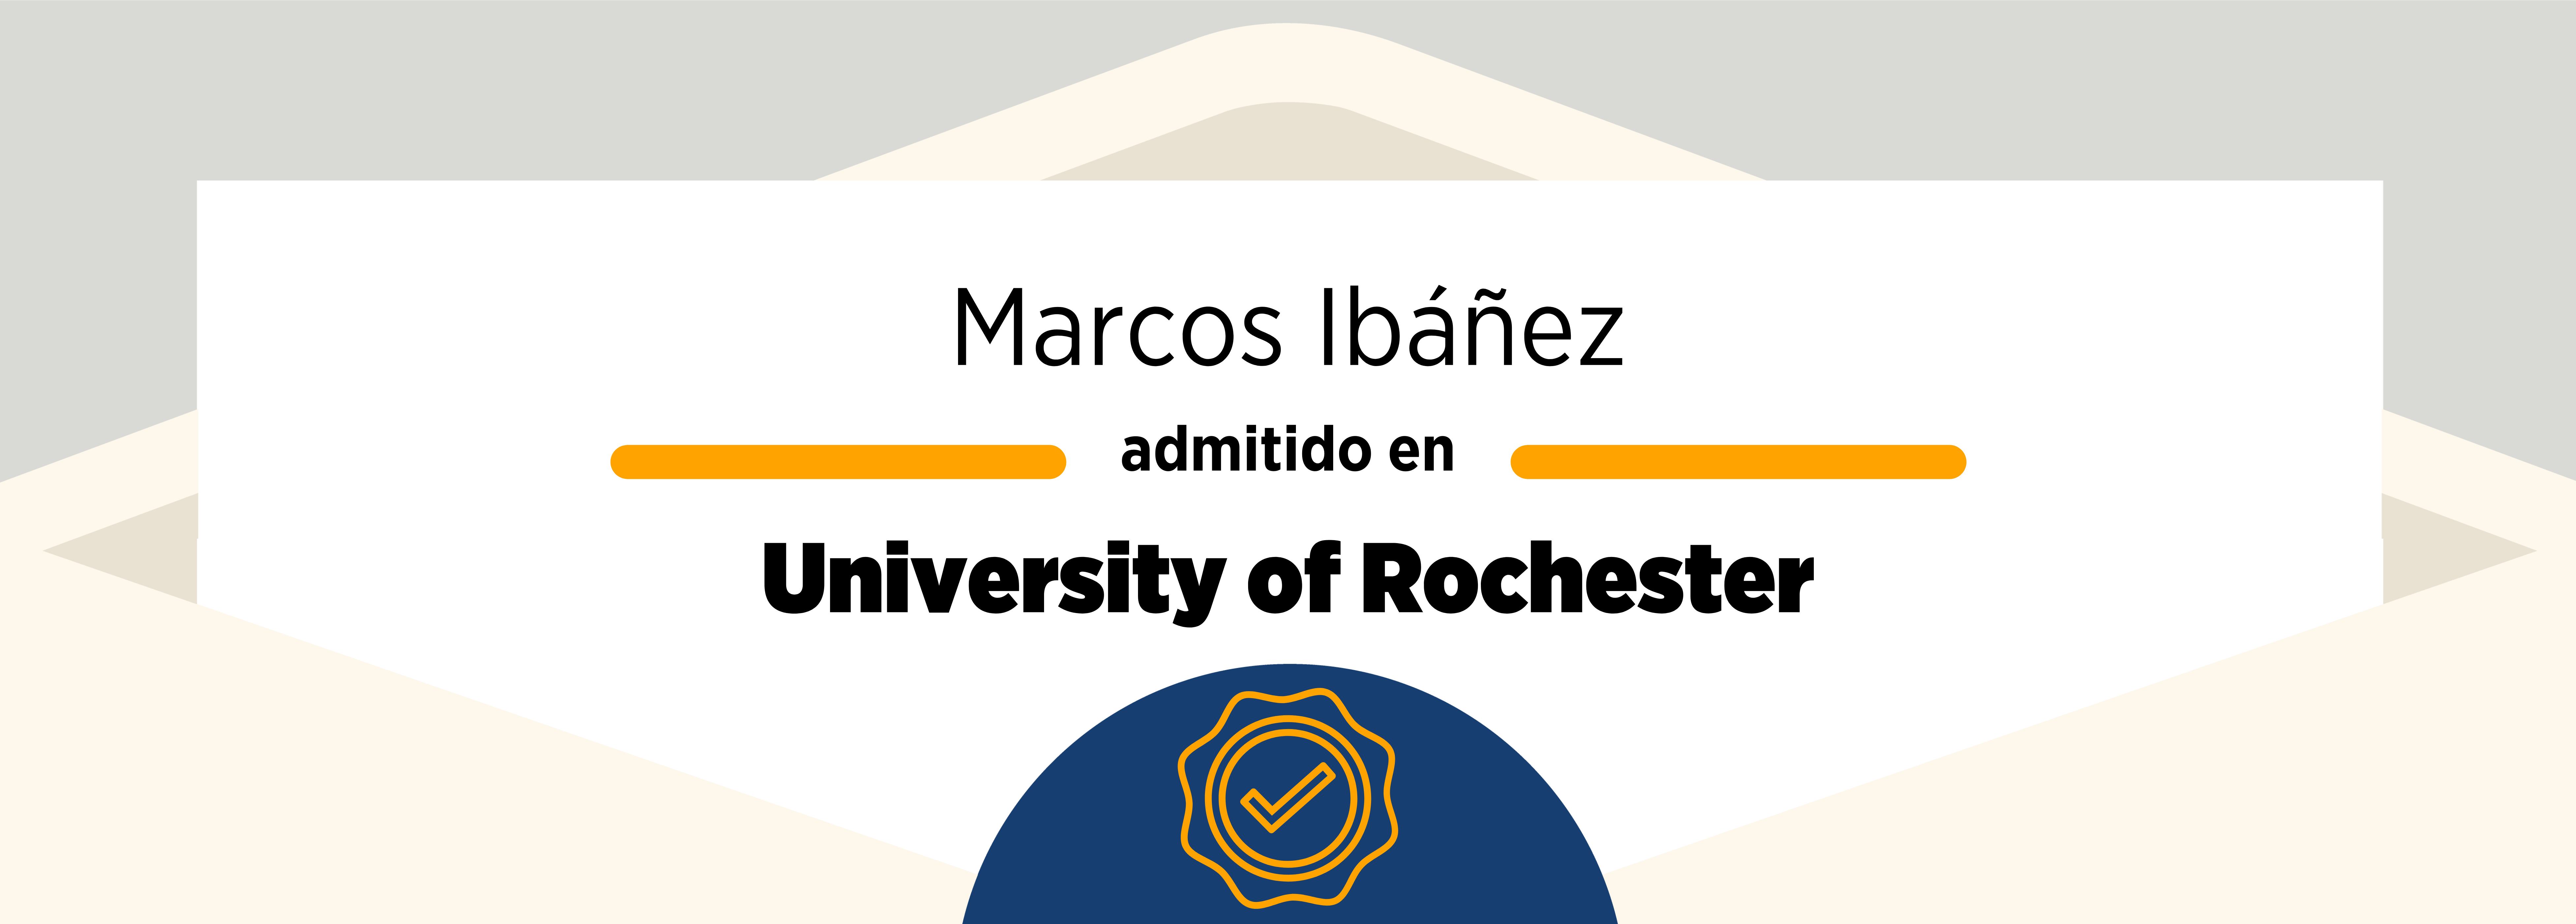 Admissions 2022: Marcos Ibáñez and University of Rochester